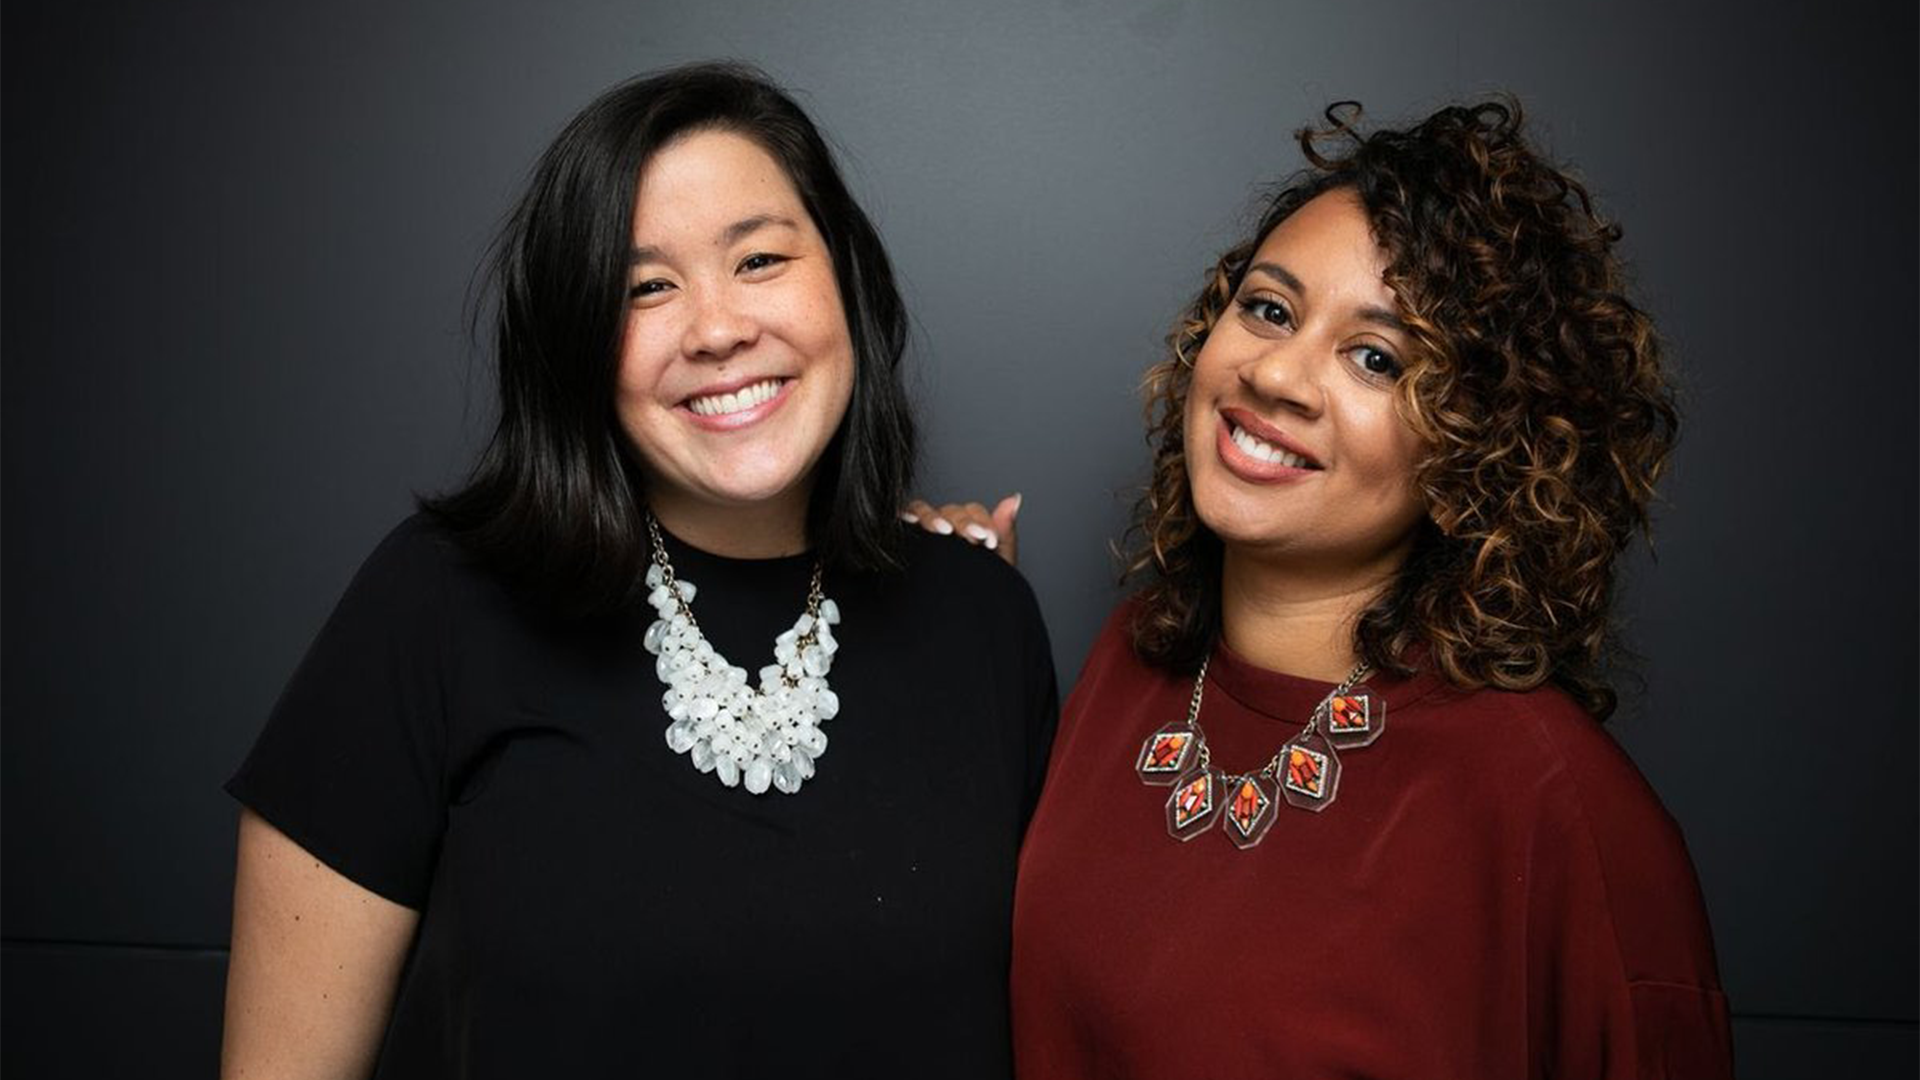 These Founders Developed A Mental Health Platform To Empower People Of Color In The Workplace